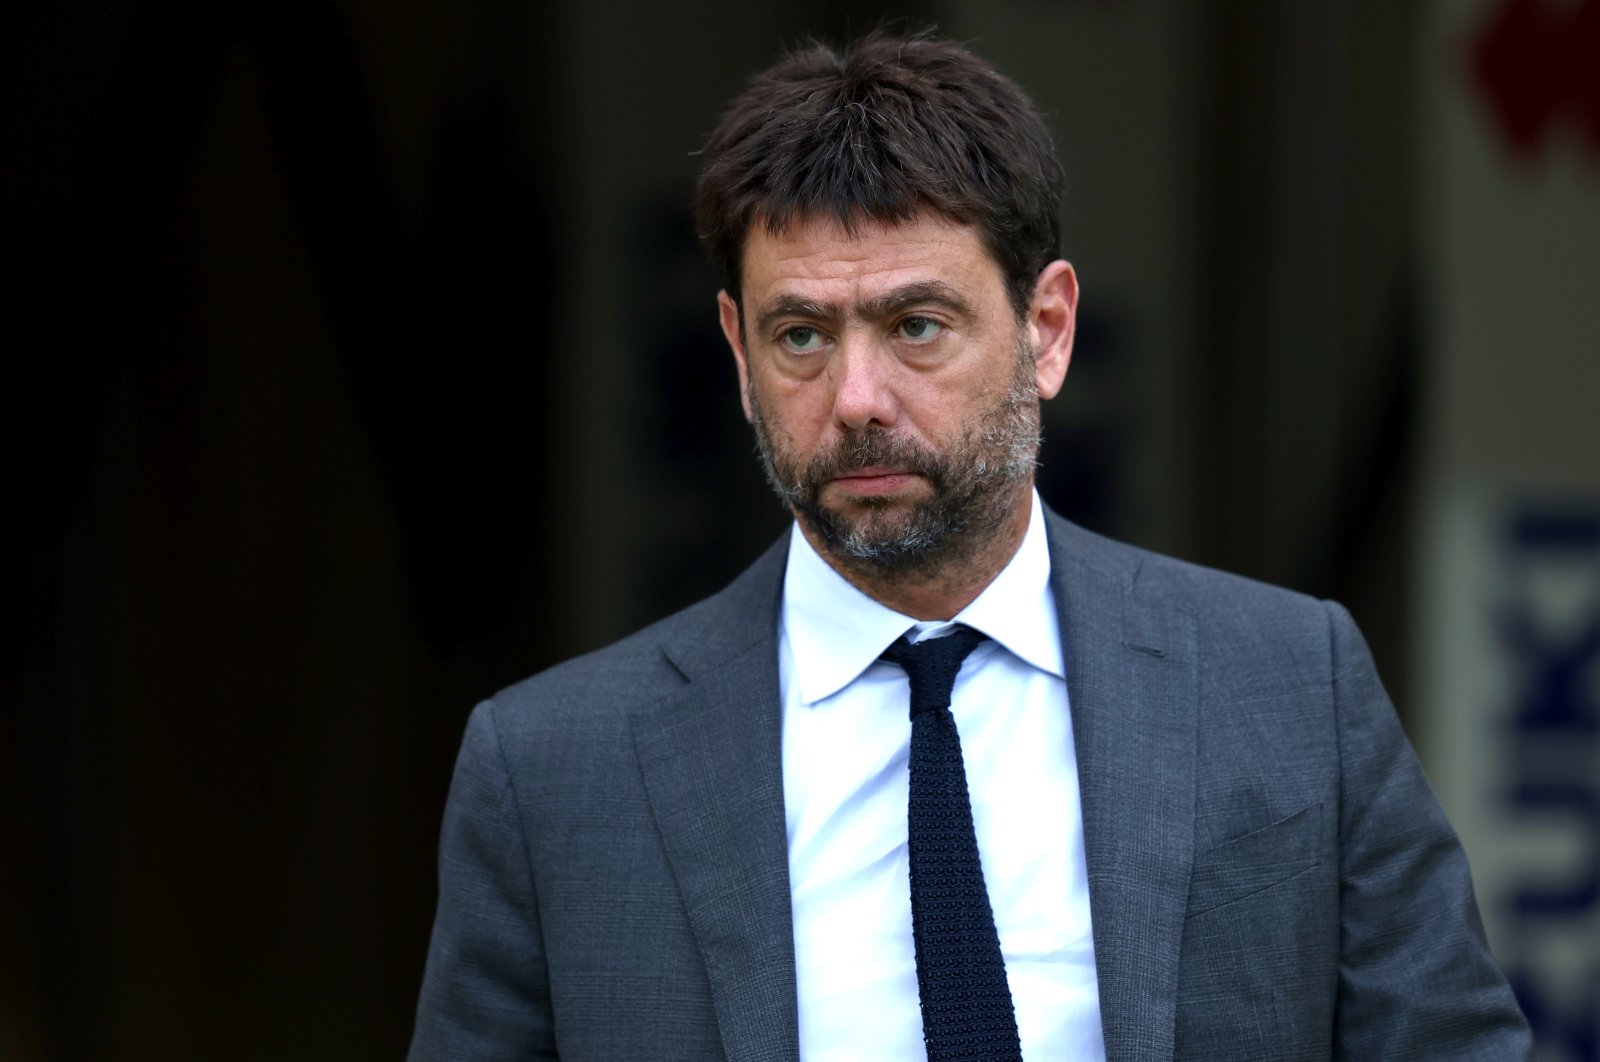 Juventus President Andrea Agnelli looks on during the Serie A match between Torino FC and Juventus FC at Stadio Grande Torino, Turin, Italy, Oct. 15, 2022. (Getty Images Photo)